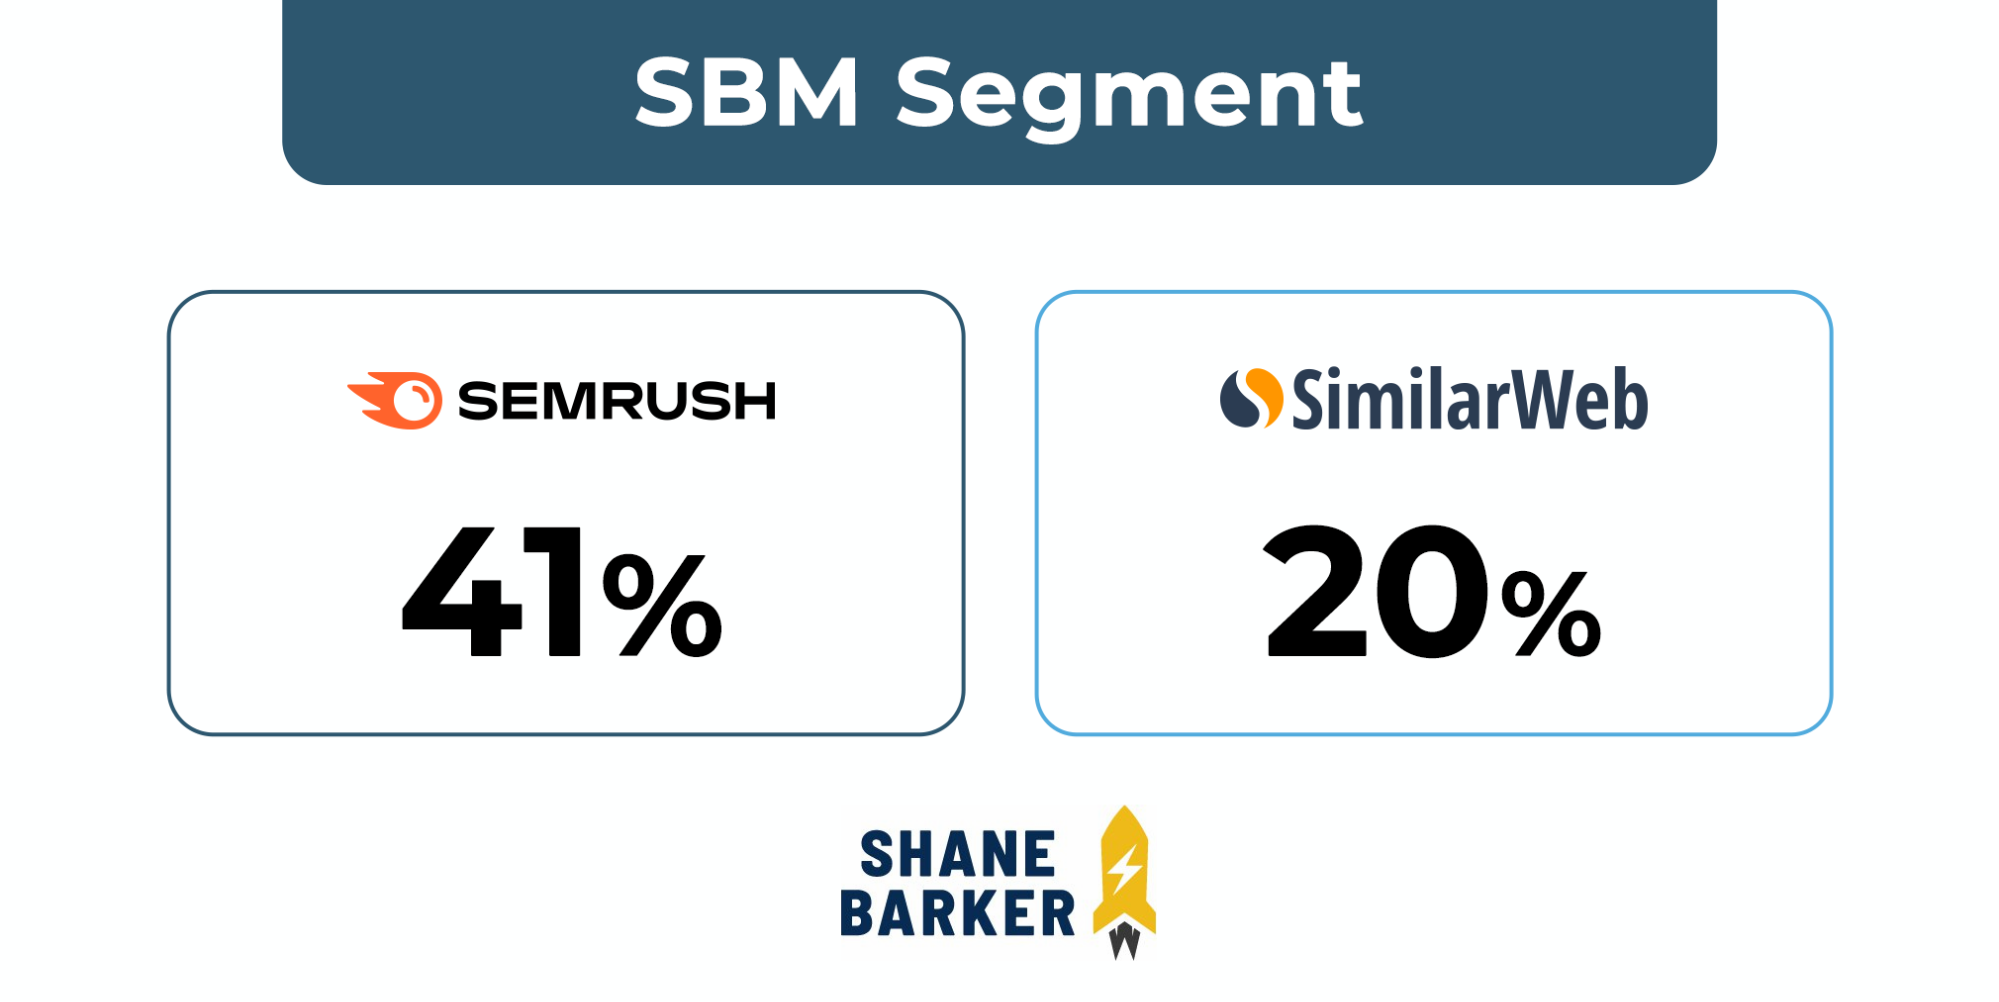 Semrush vs. Similarweb Comparison: Which Solution Has the Widest Traffic Data Coverage for SMBs?